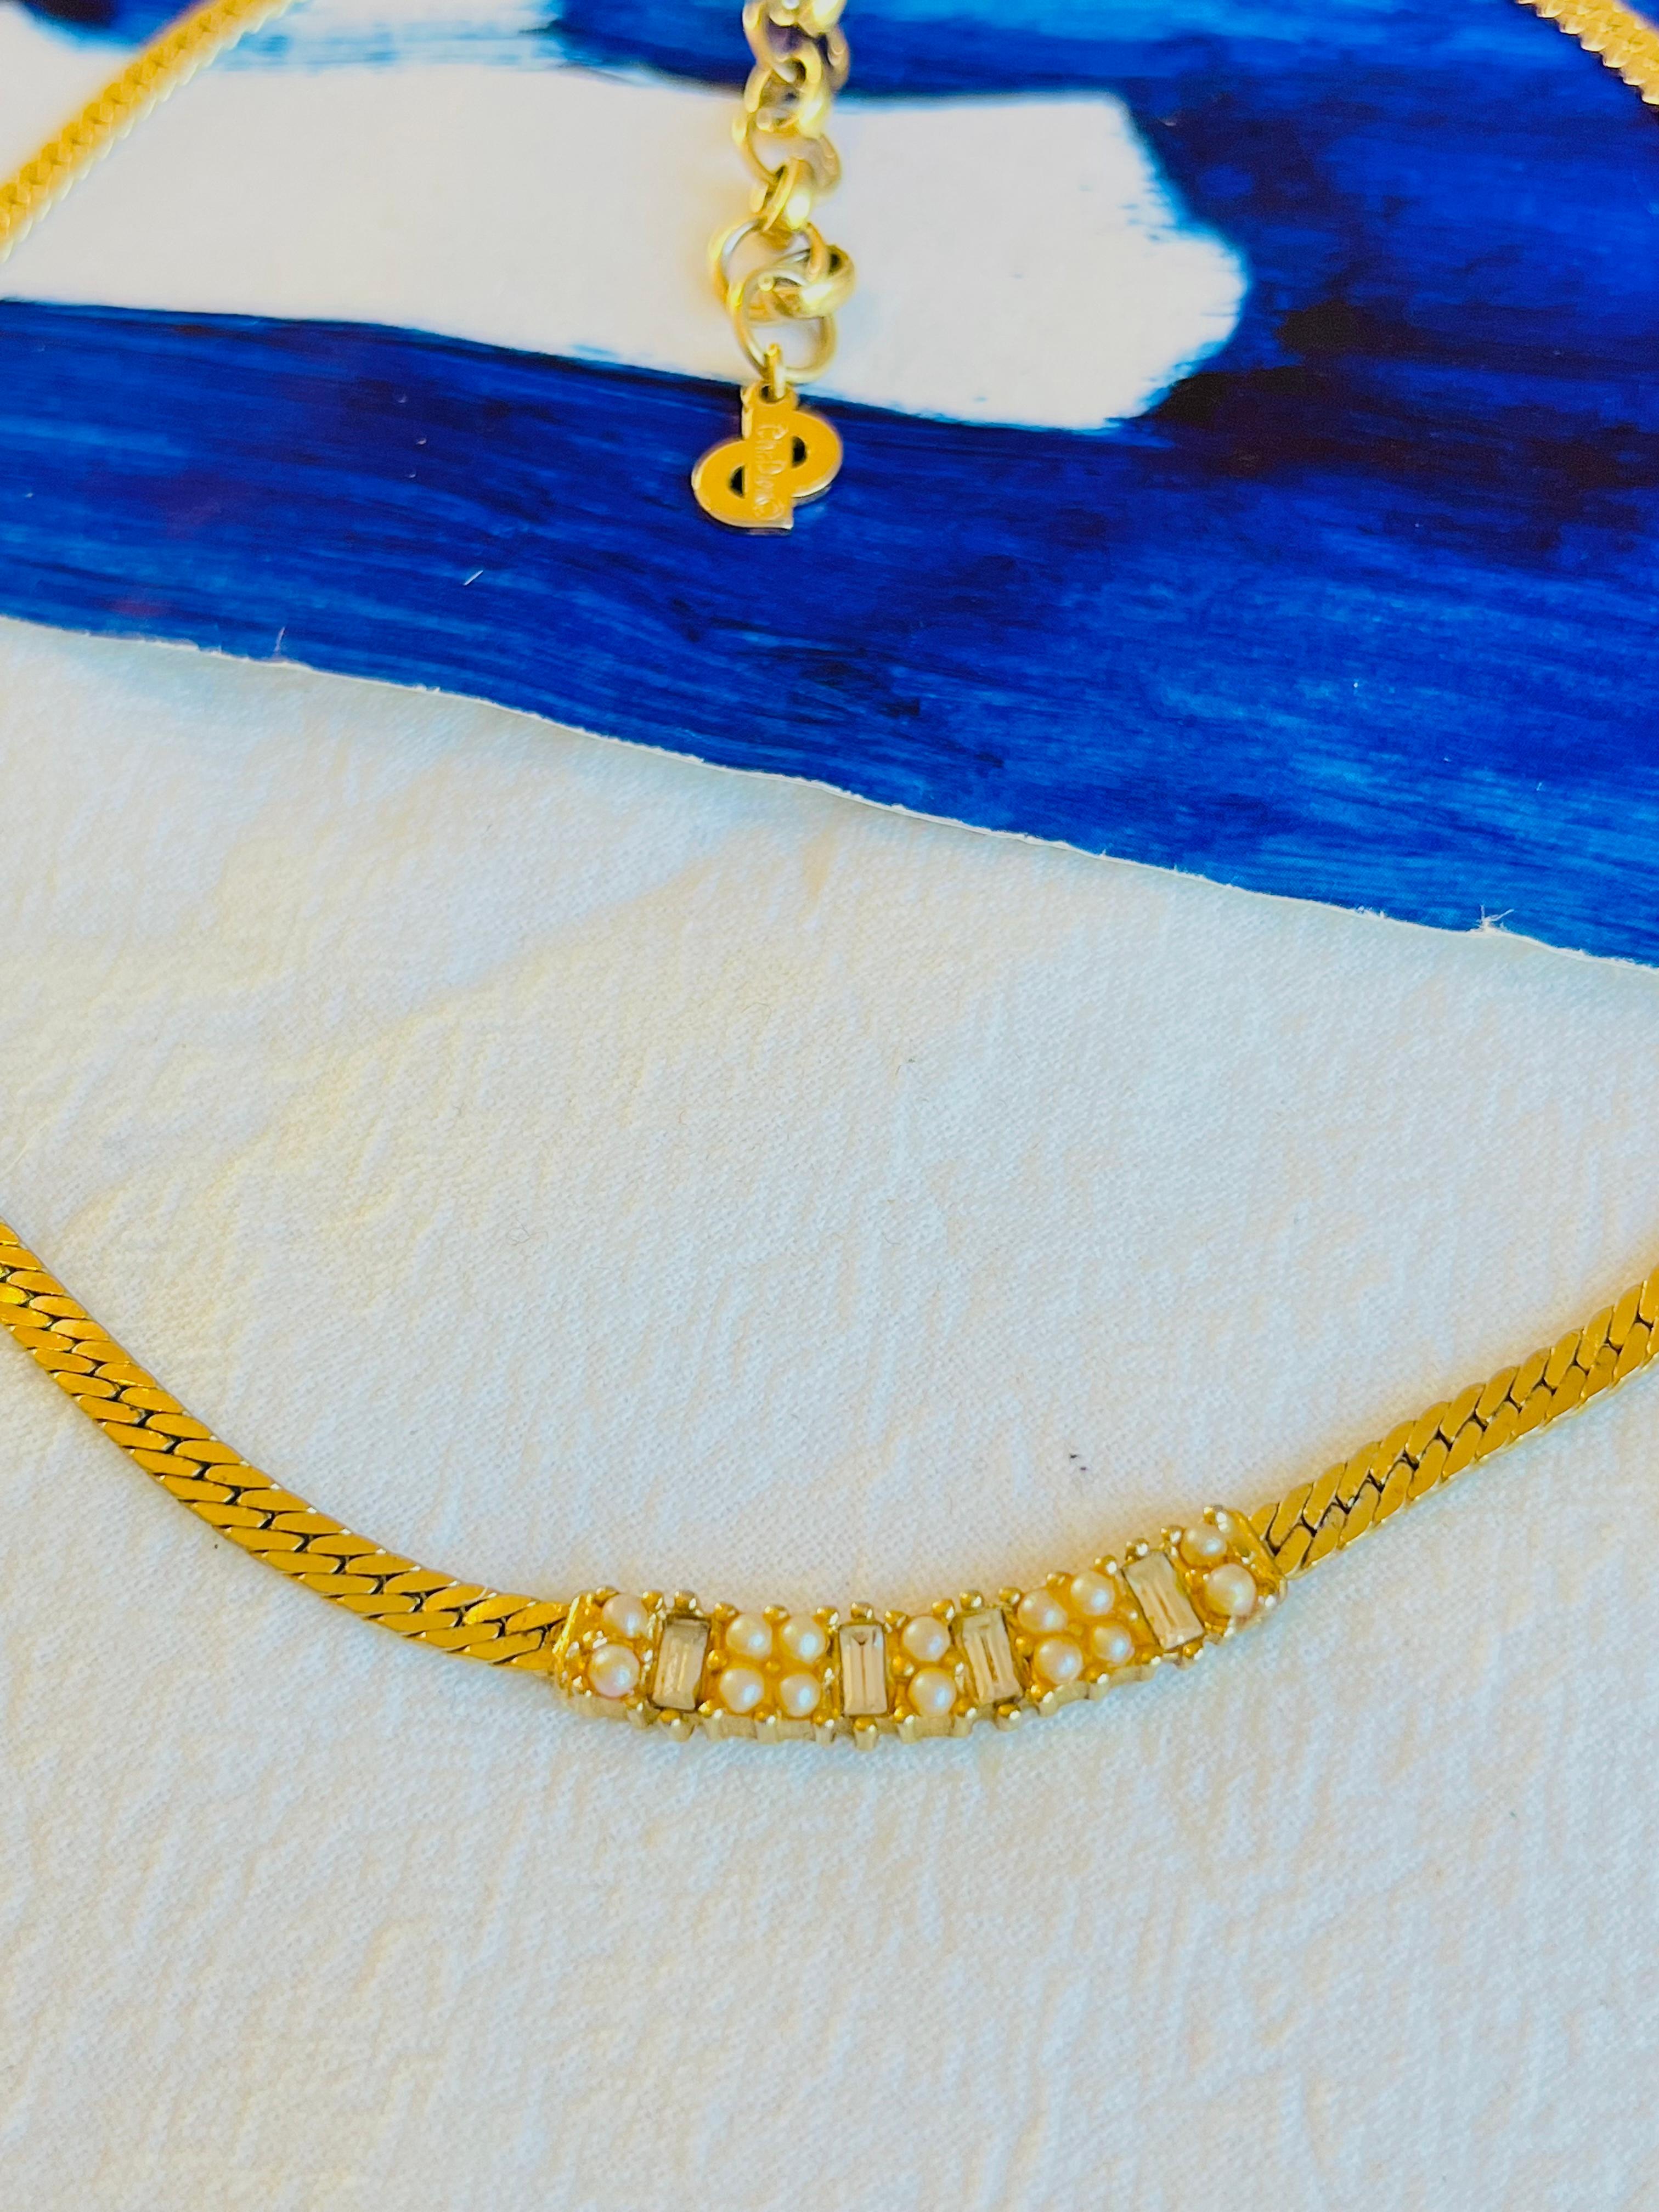 Christian Dior Vintage 1970s Beaded Pearls Crystals Long Bar Pendant Necklace In Good Condition For Sale In Wokingham, England